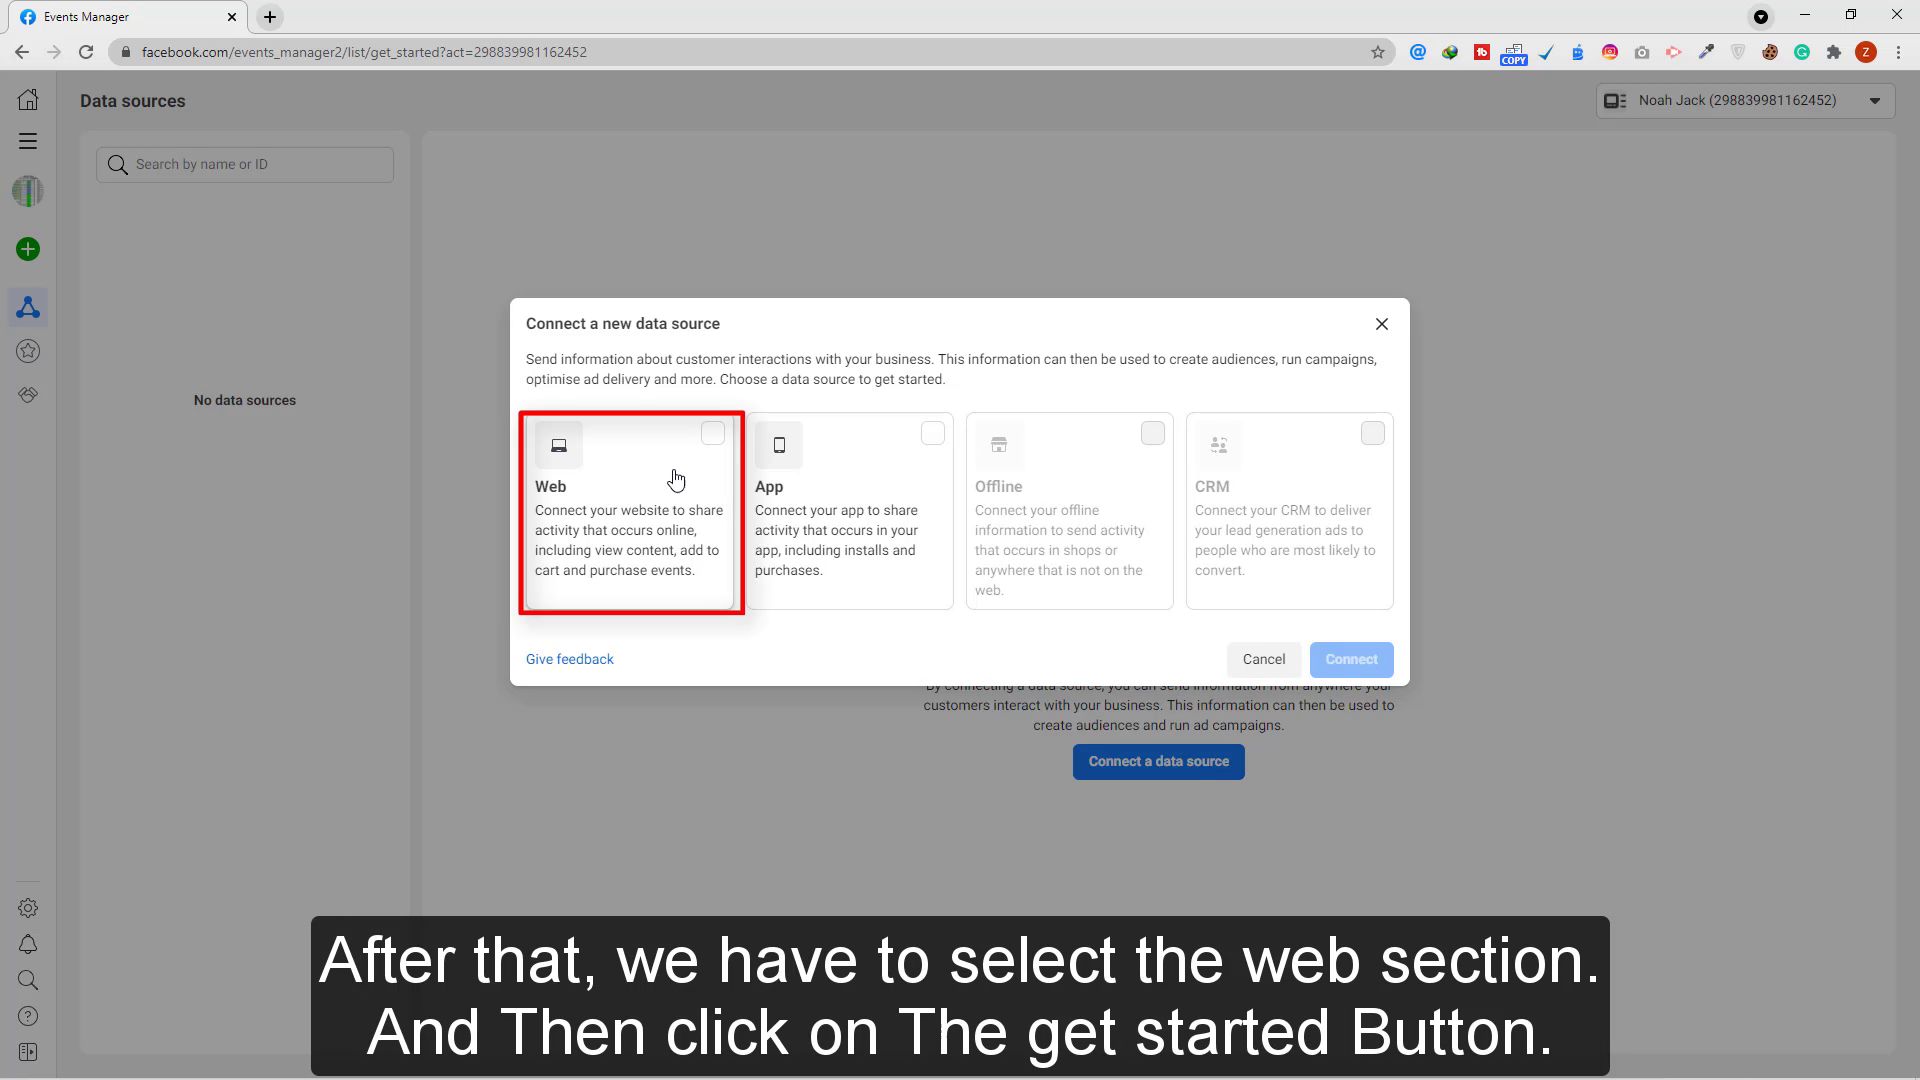 we have to select the web section